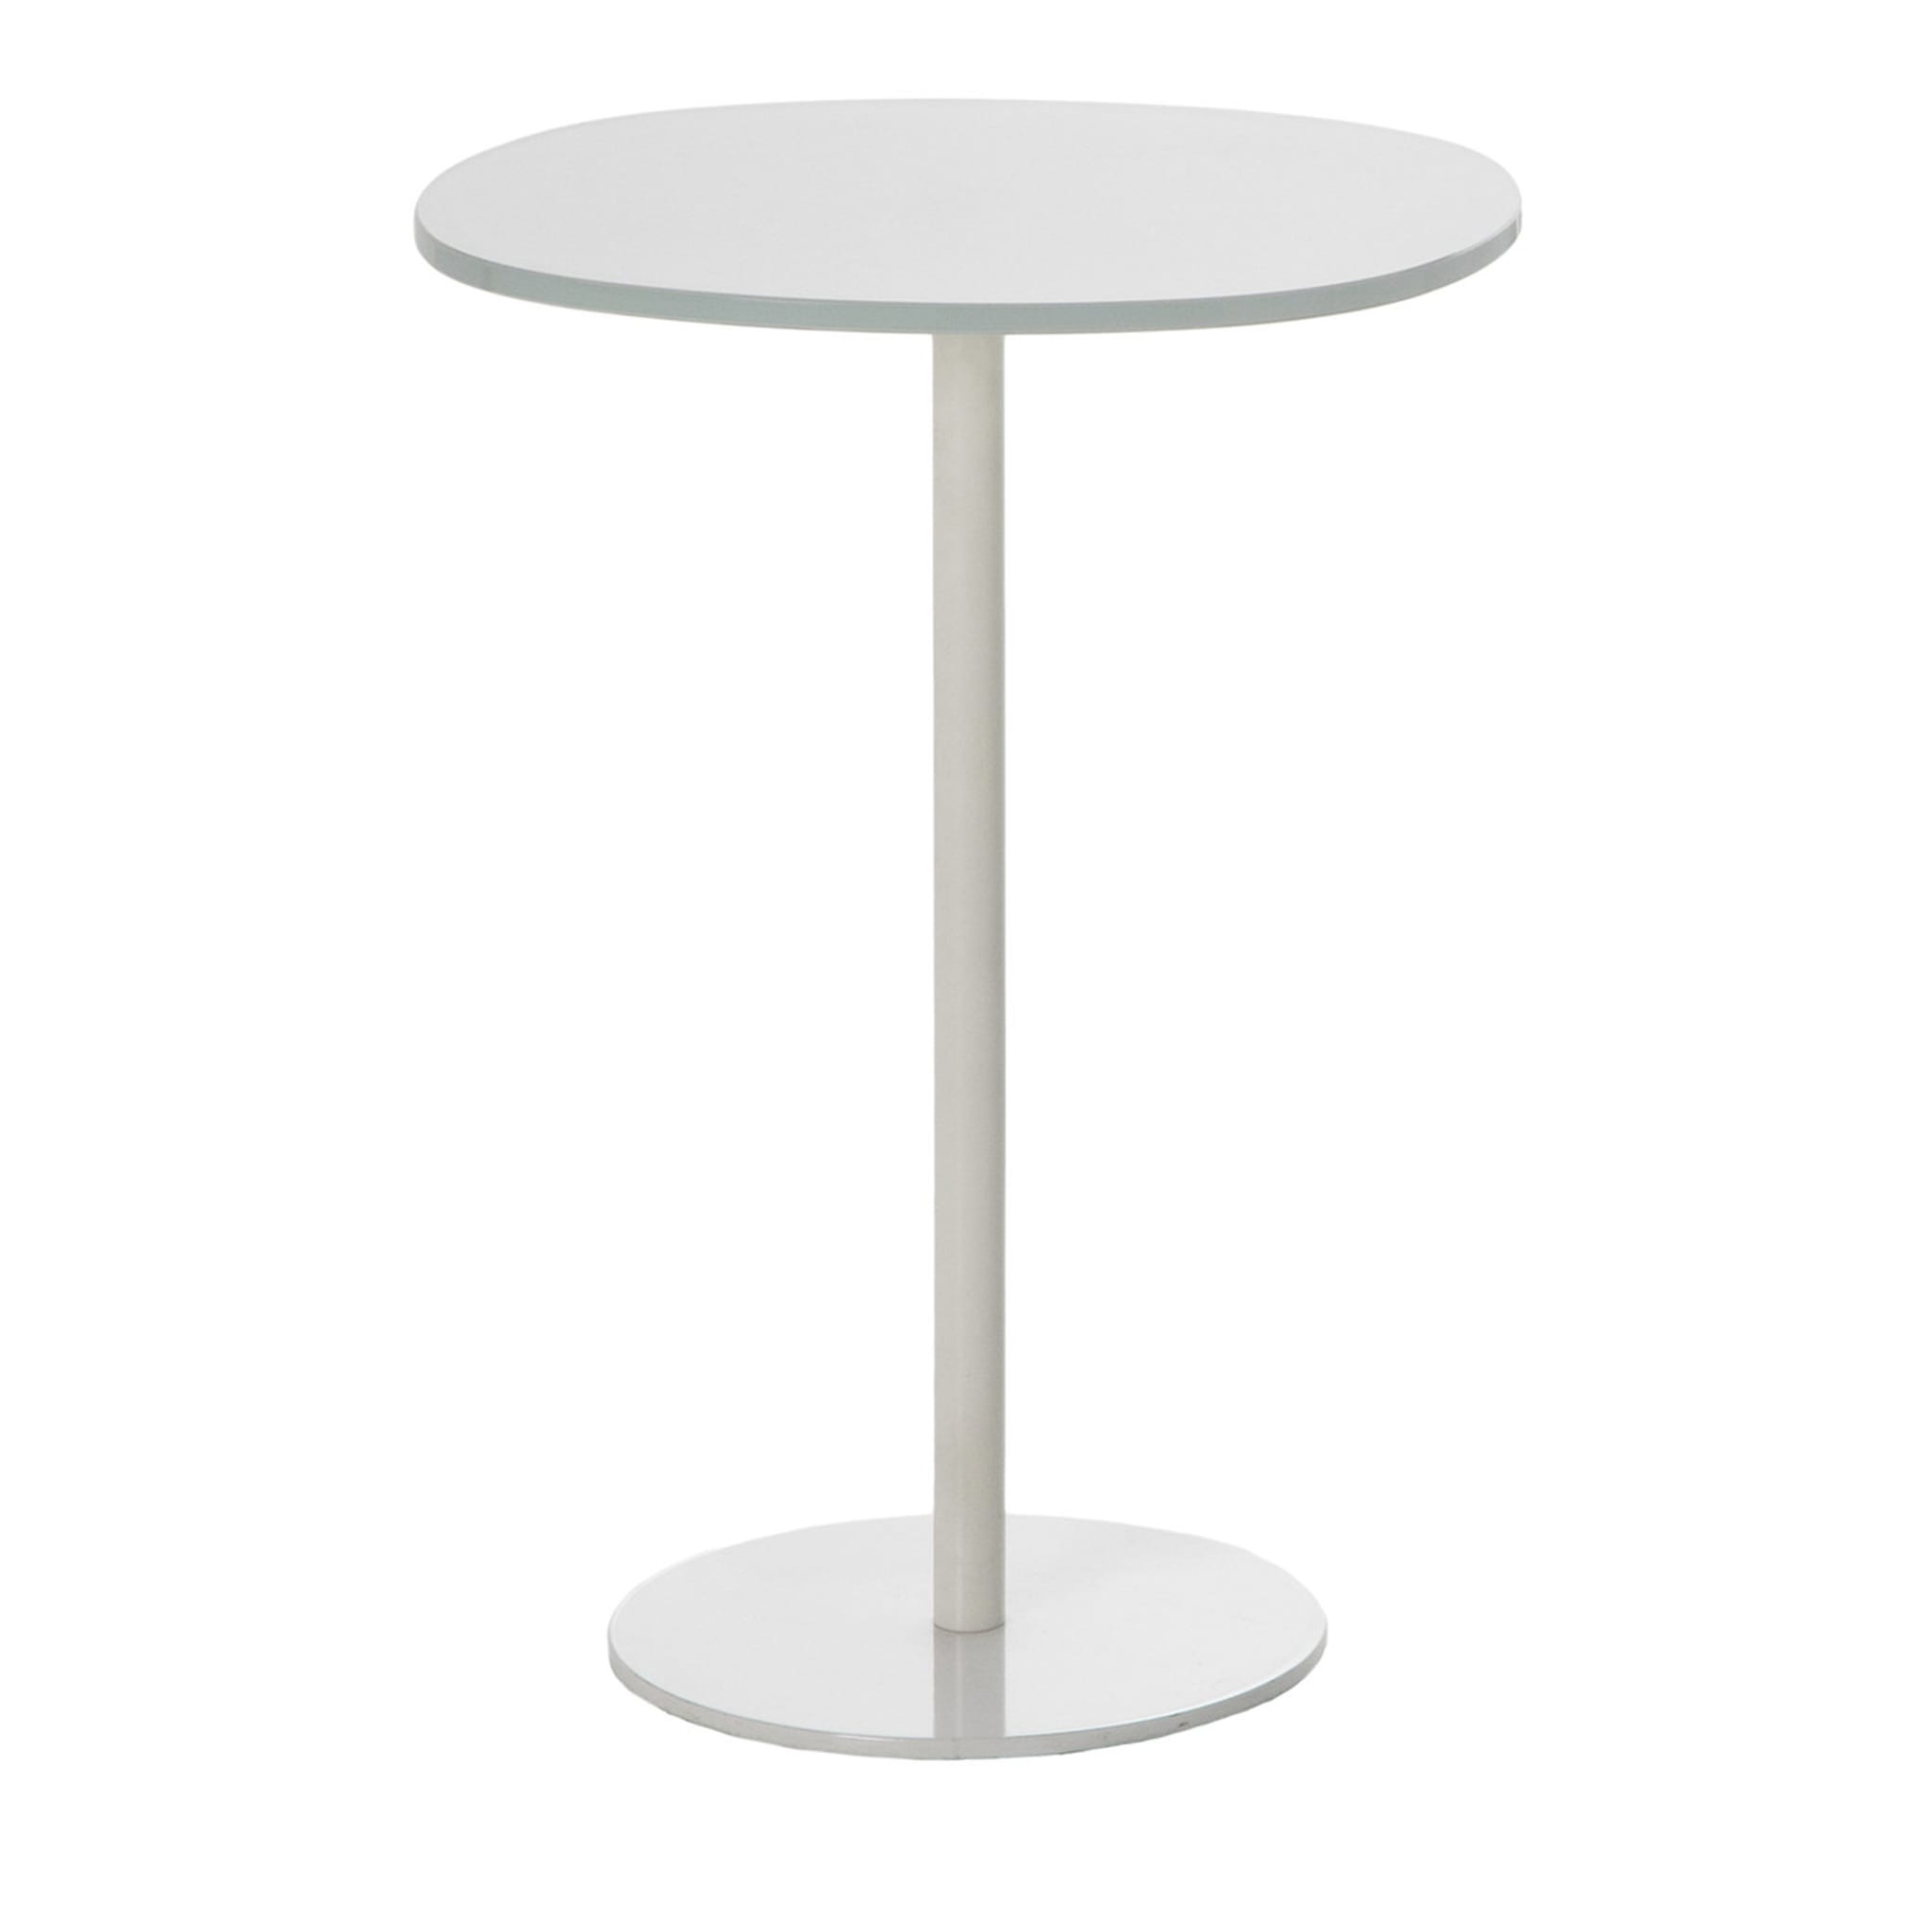 Solenoide White Tall Side Table by Piero Lissoni - Main view